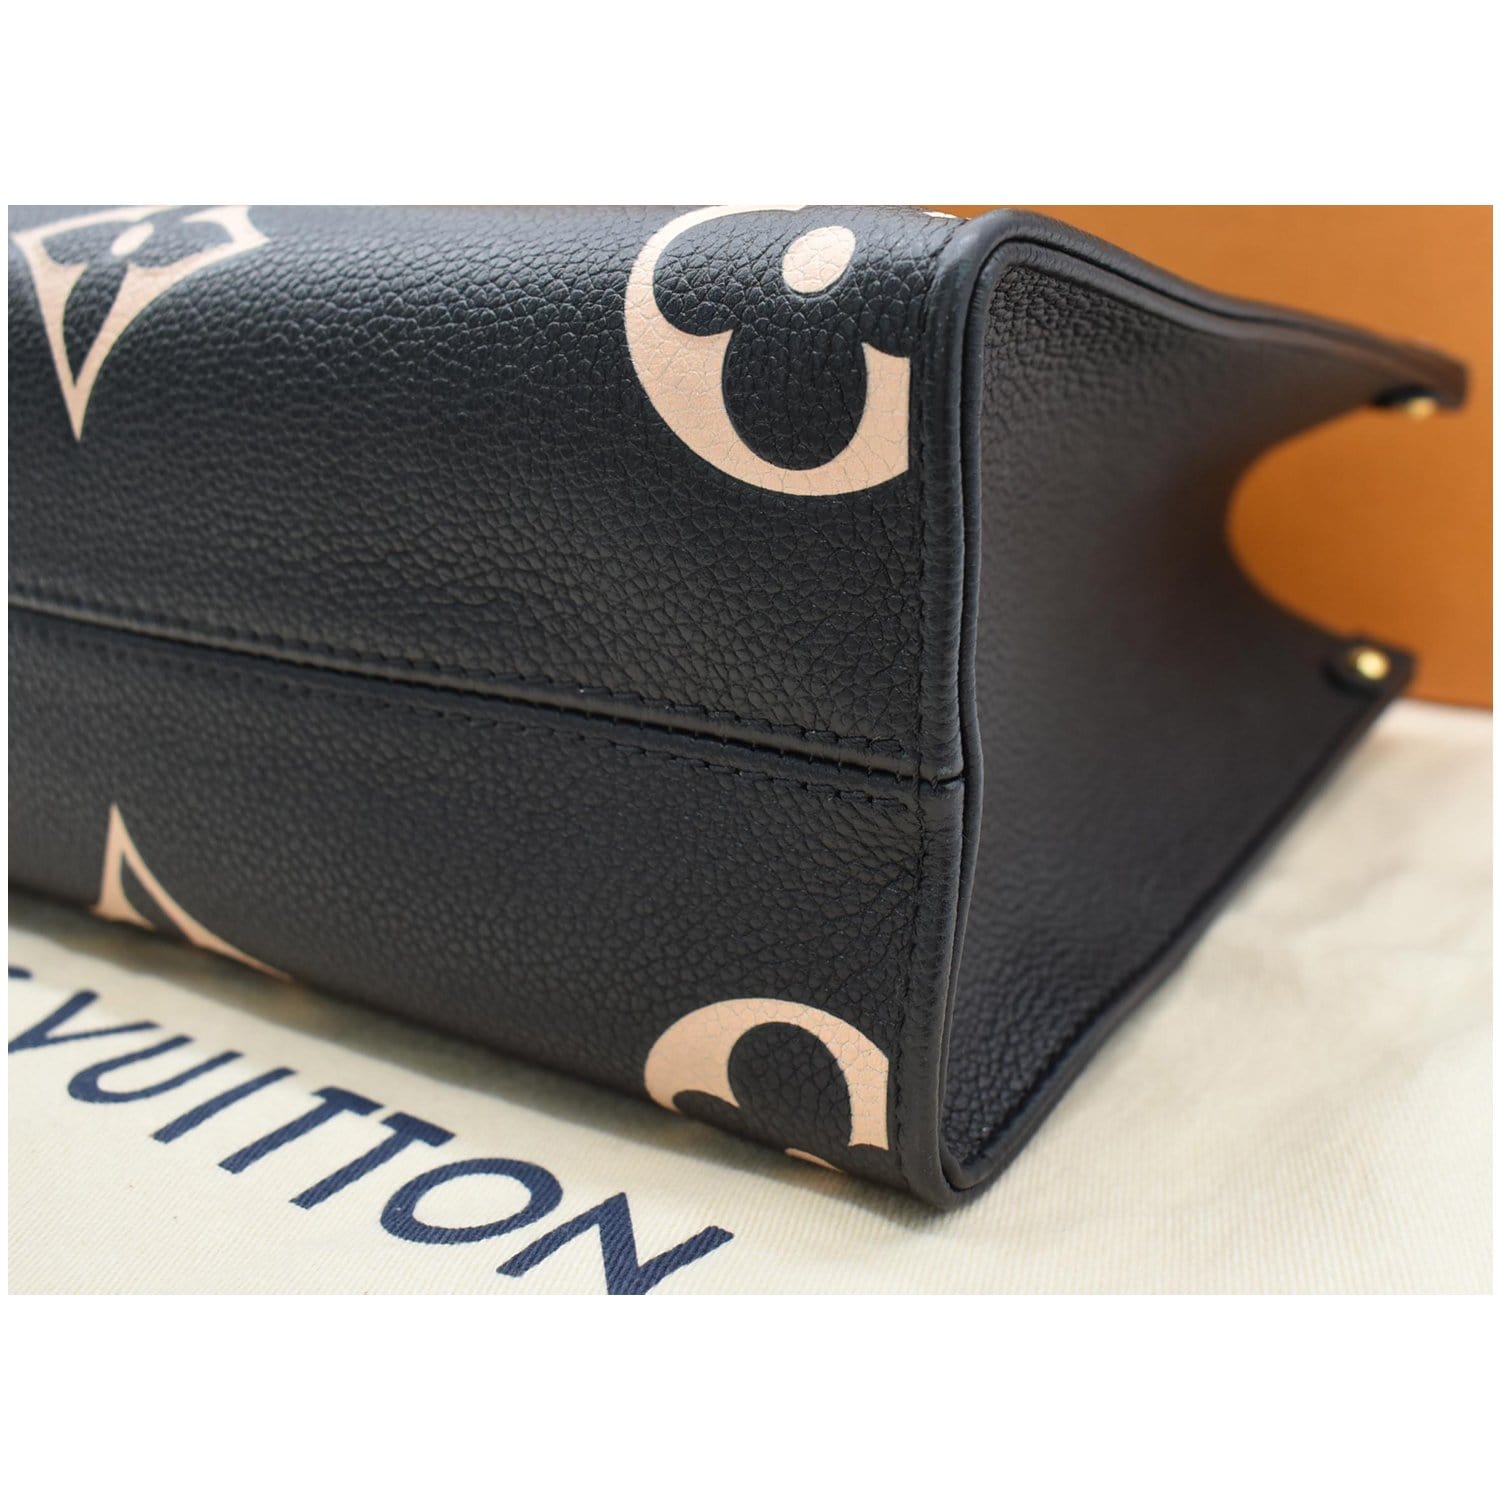 New Louis Vuitton OntheGo PM Size and Empreinte Colors for 2021 - Spotted  Fashion